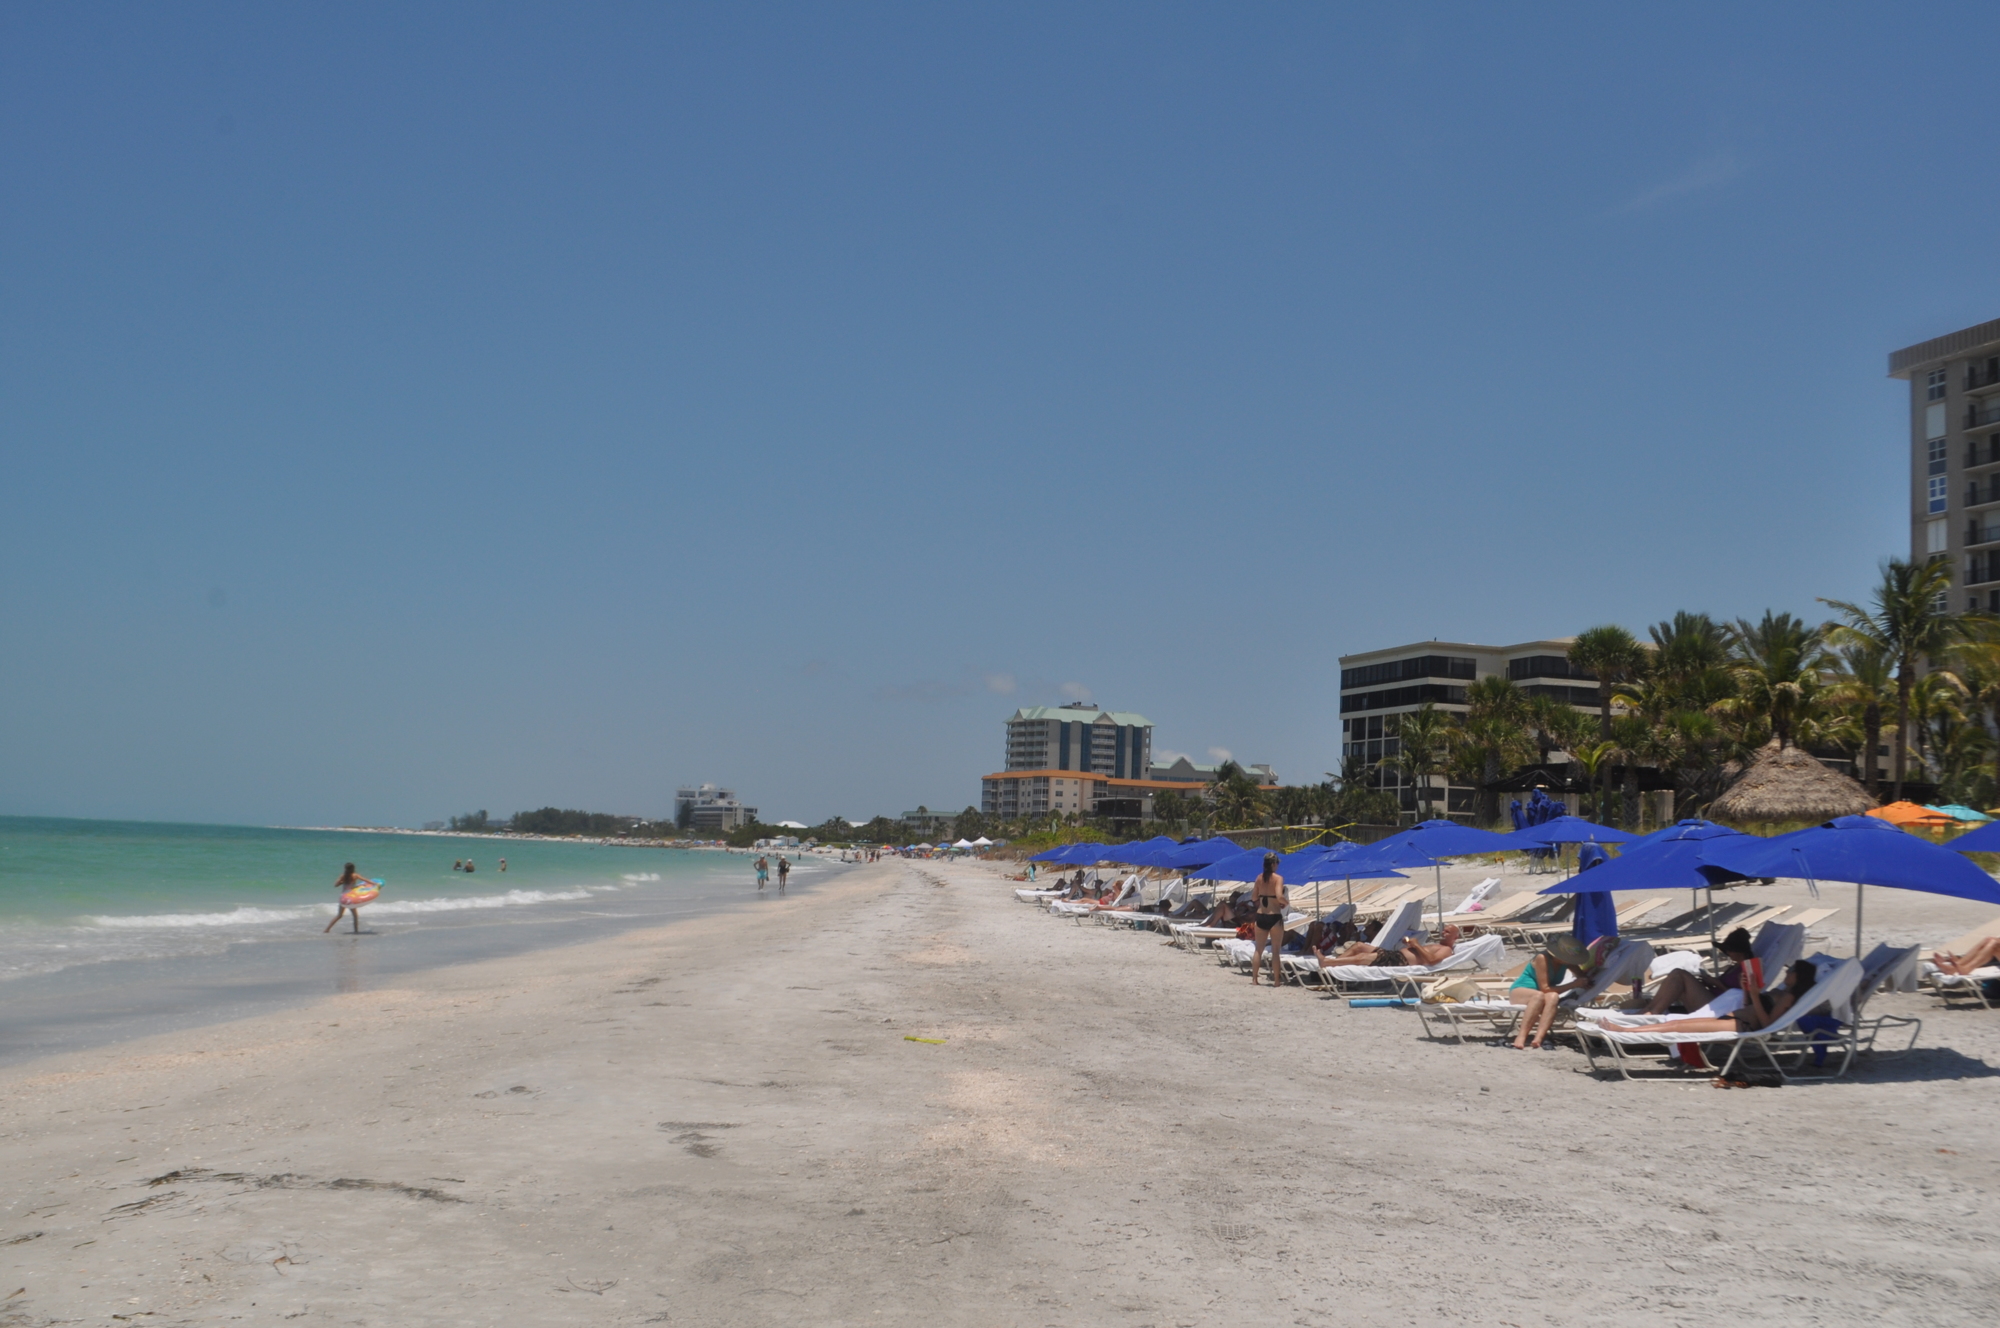 The county will focus on managing large regional attractions, such as Lido Beach.